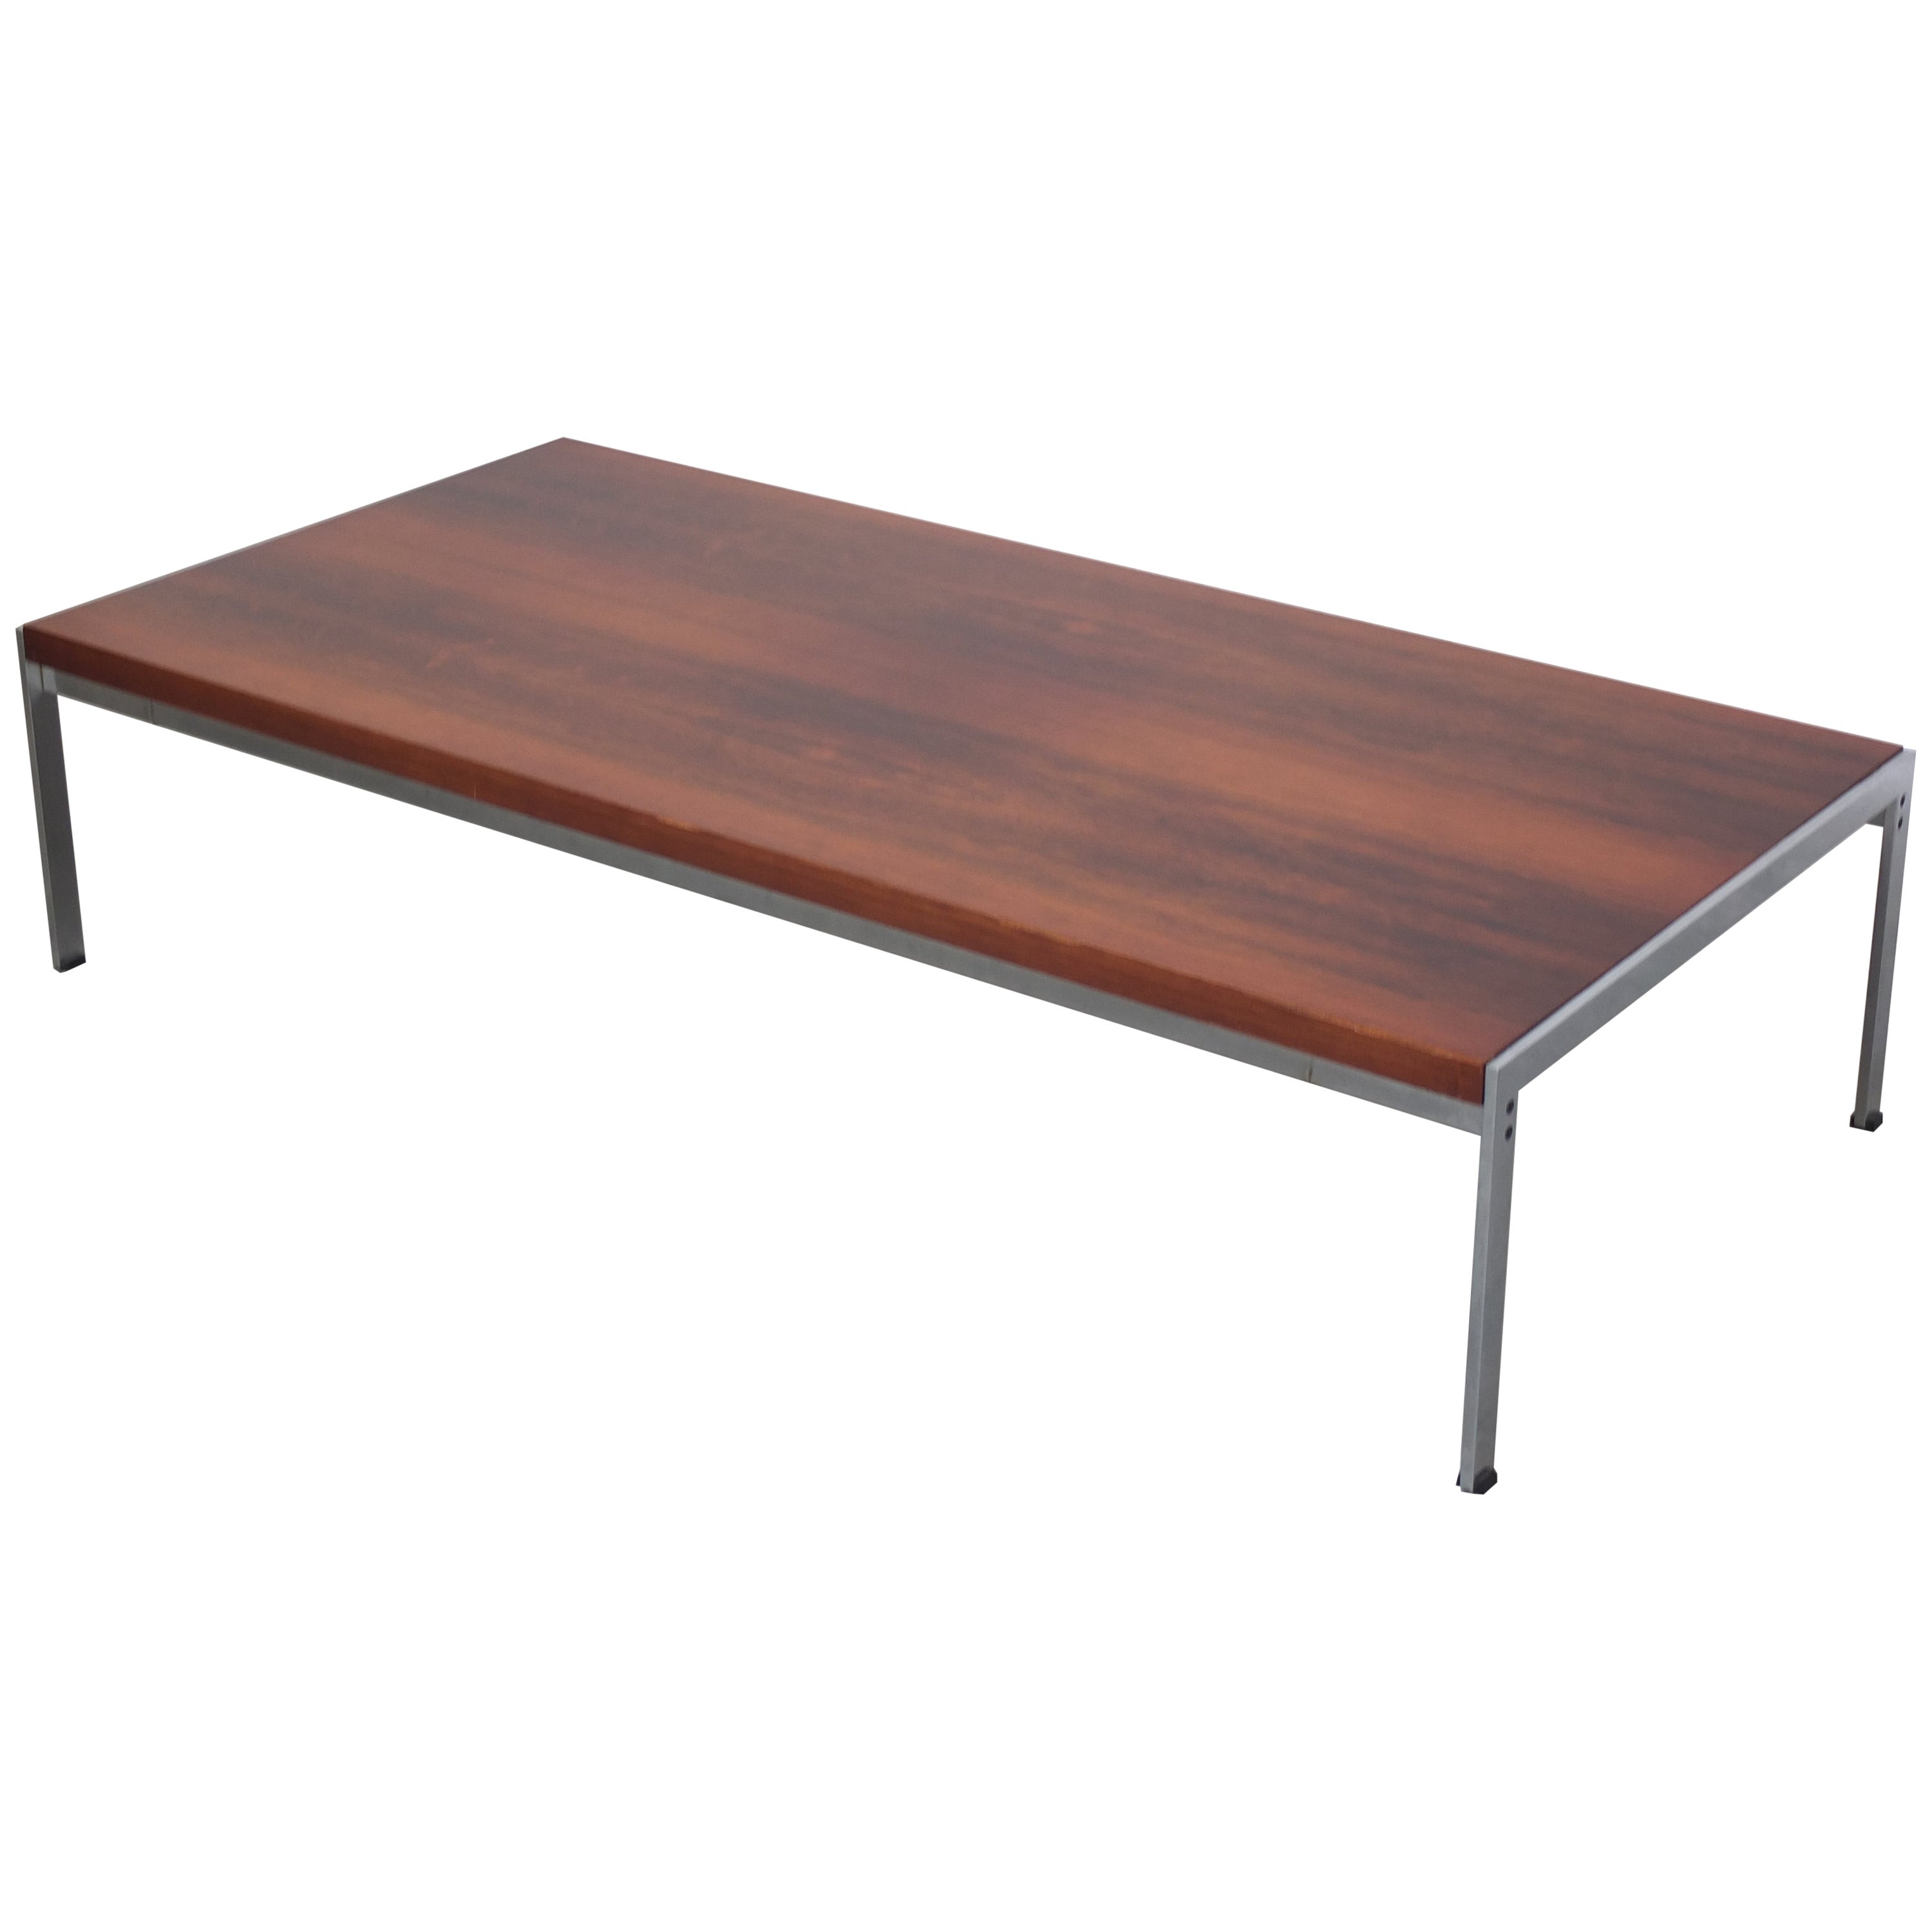 Large 'Model 867' Coffee Table by Kho Liang Ie for Artifort, 1958 For Sale